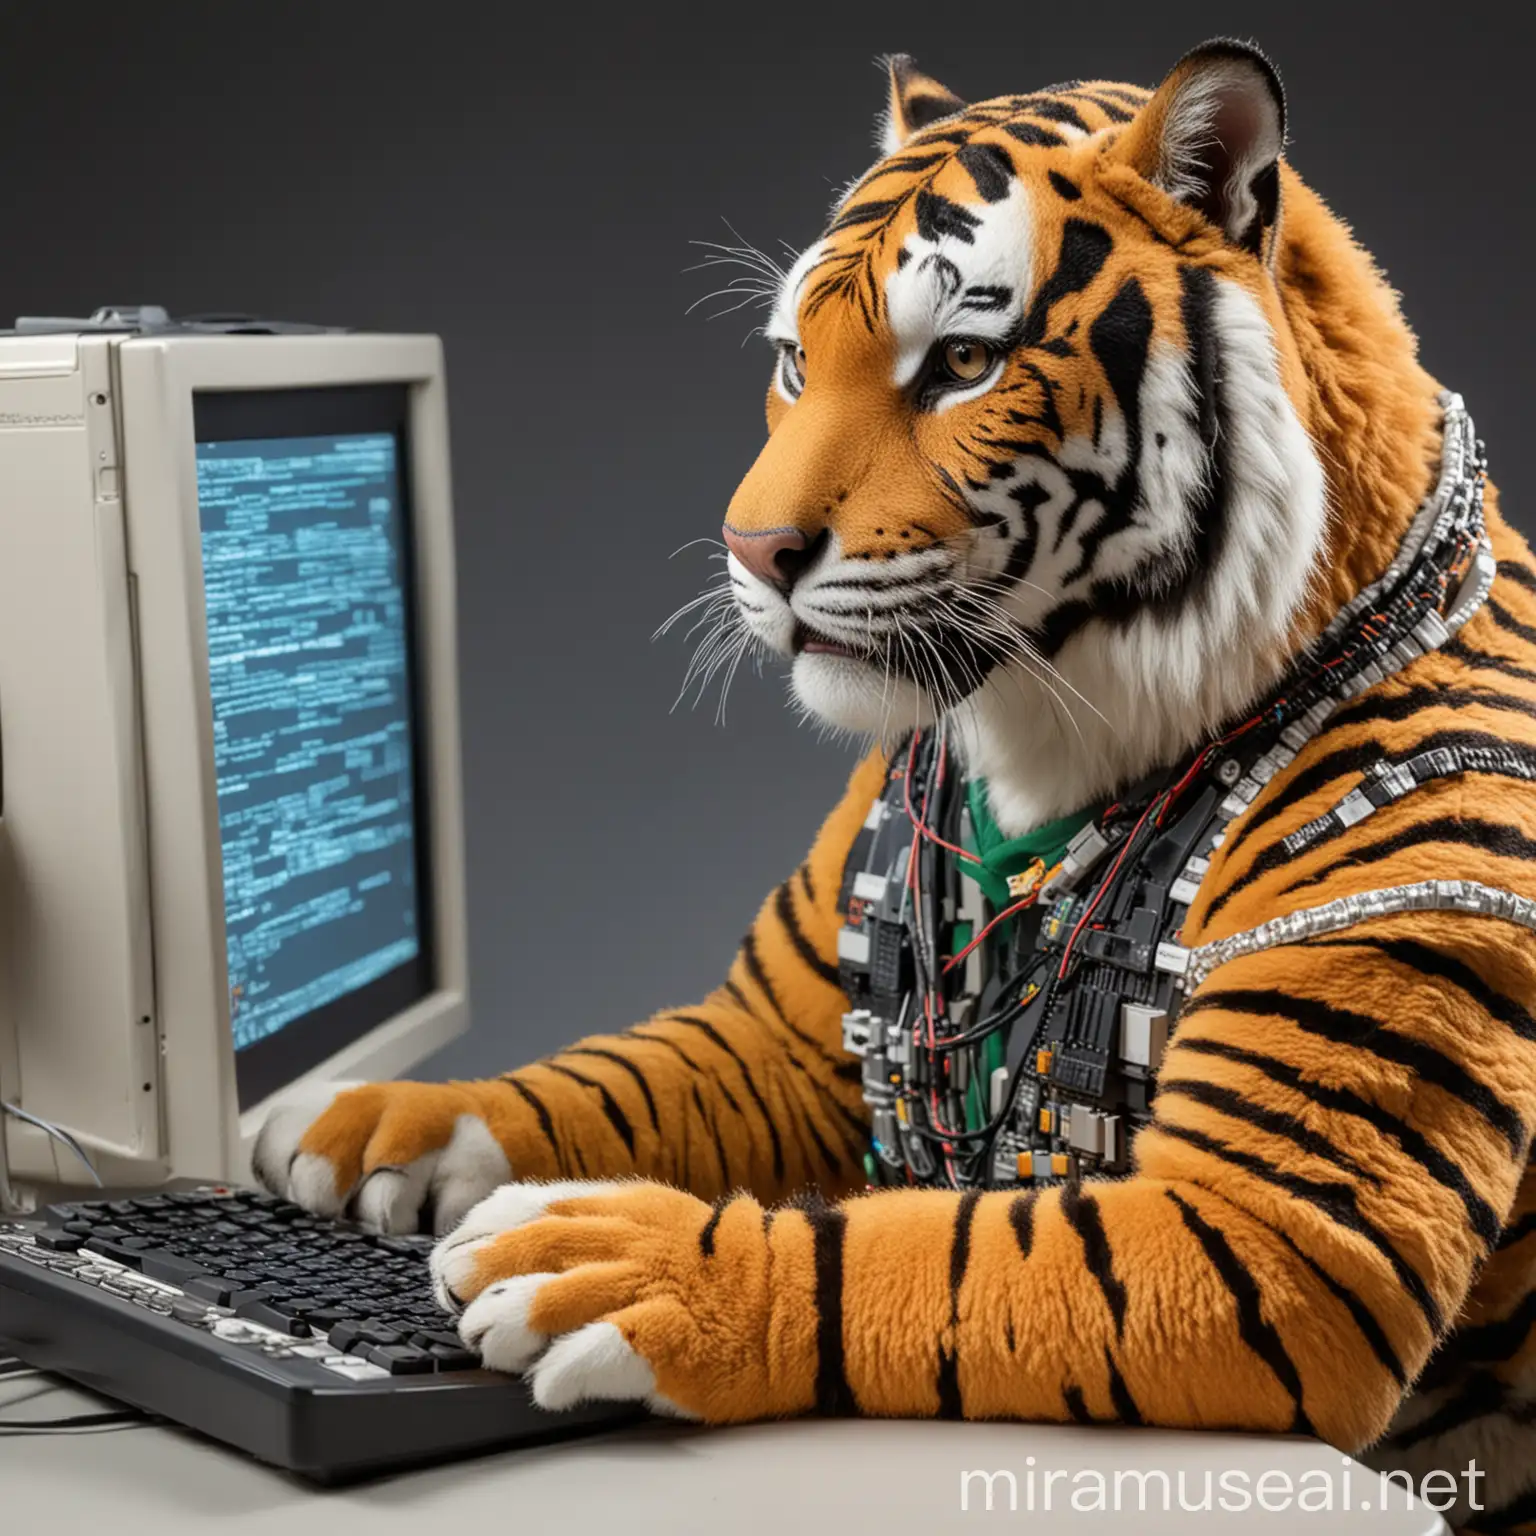 Tiger Systems Engineer Programming on Computer